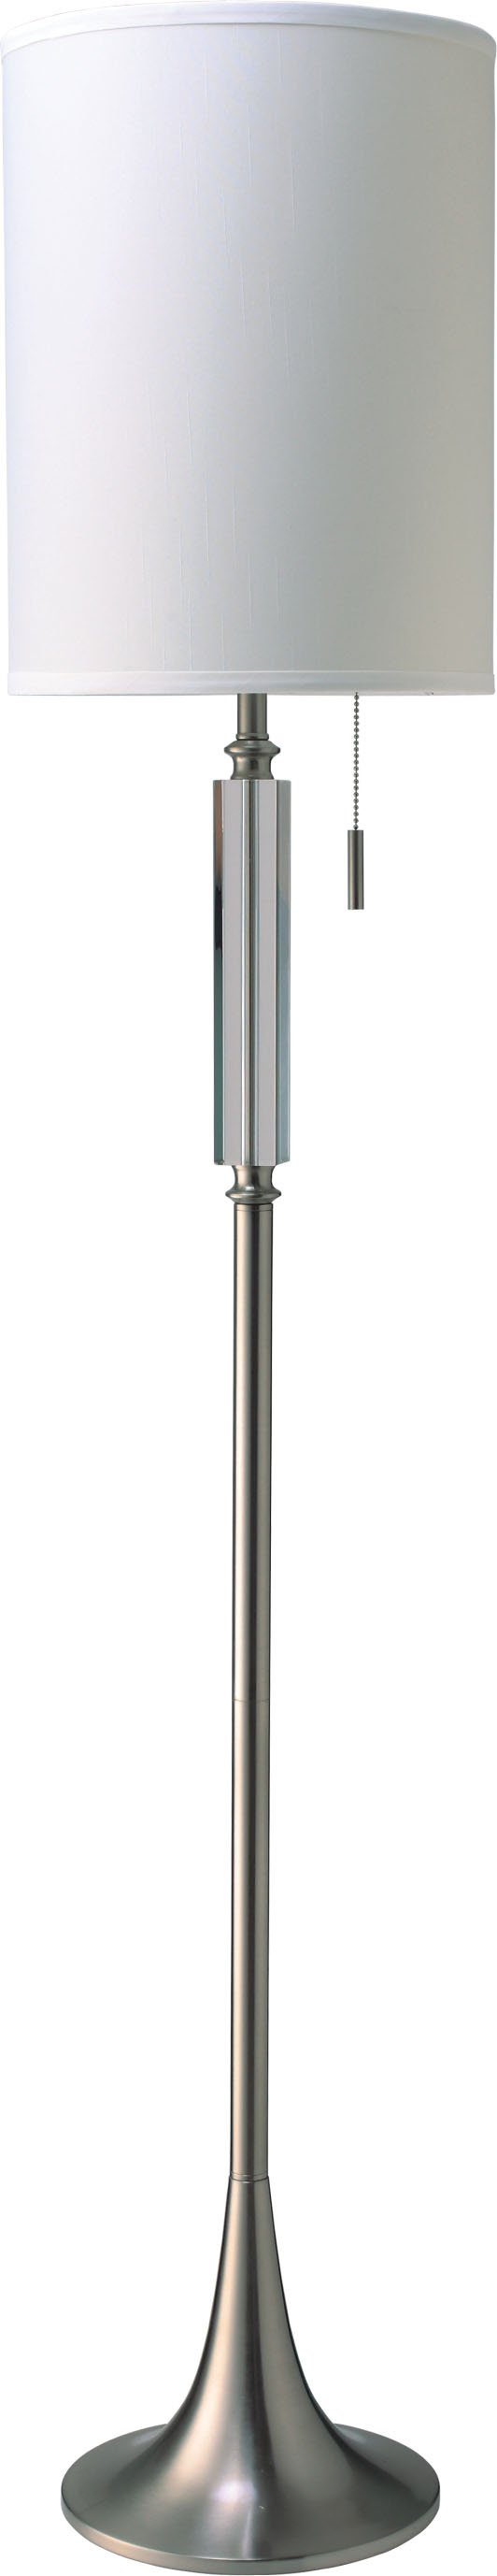 Cody Floor Lamp, Brushed Silver & Crystal - MyTinyHaus, [product_description]